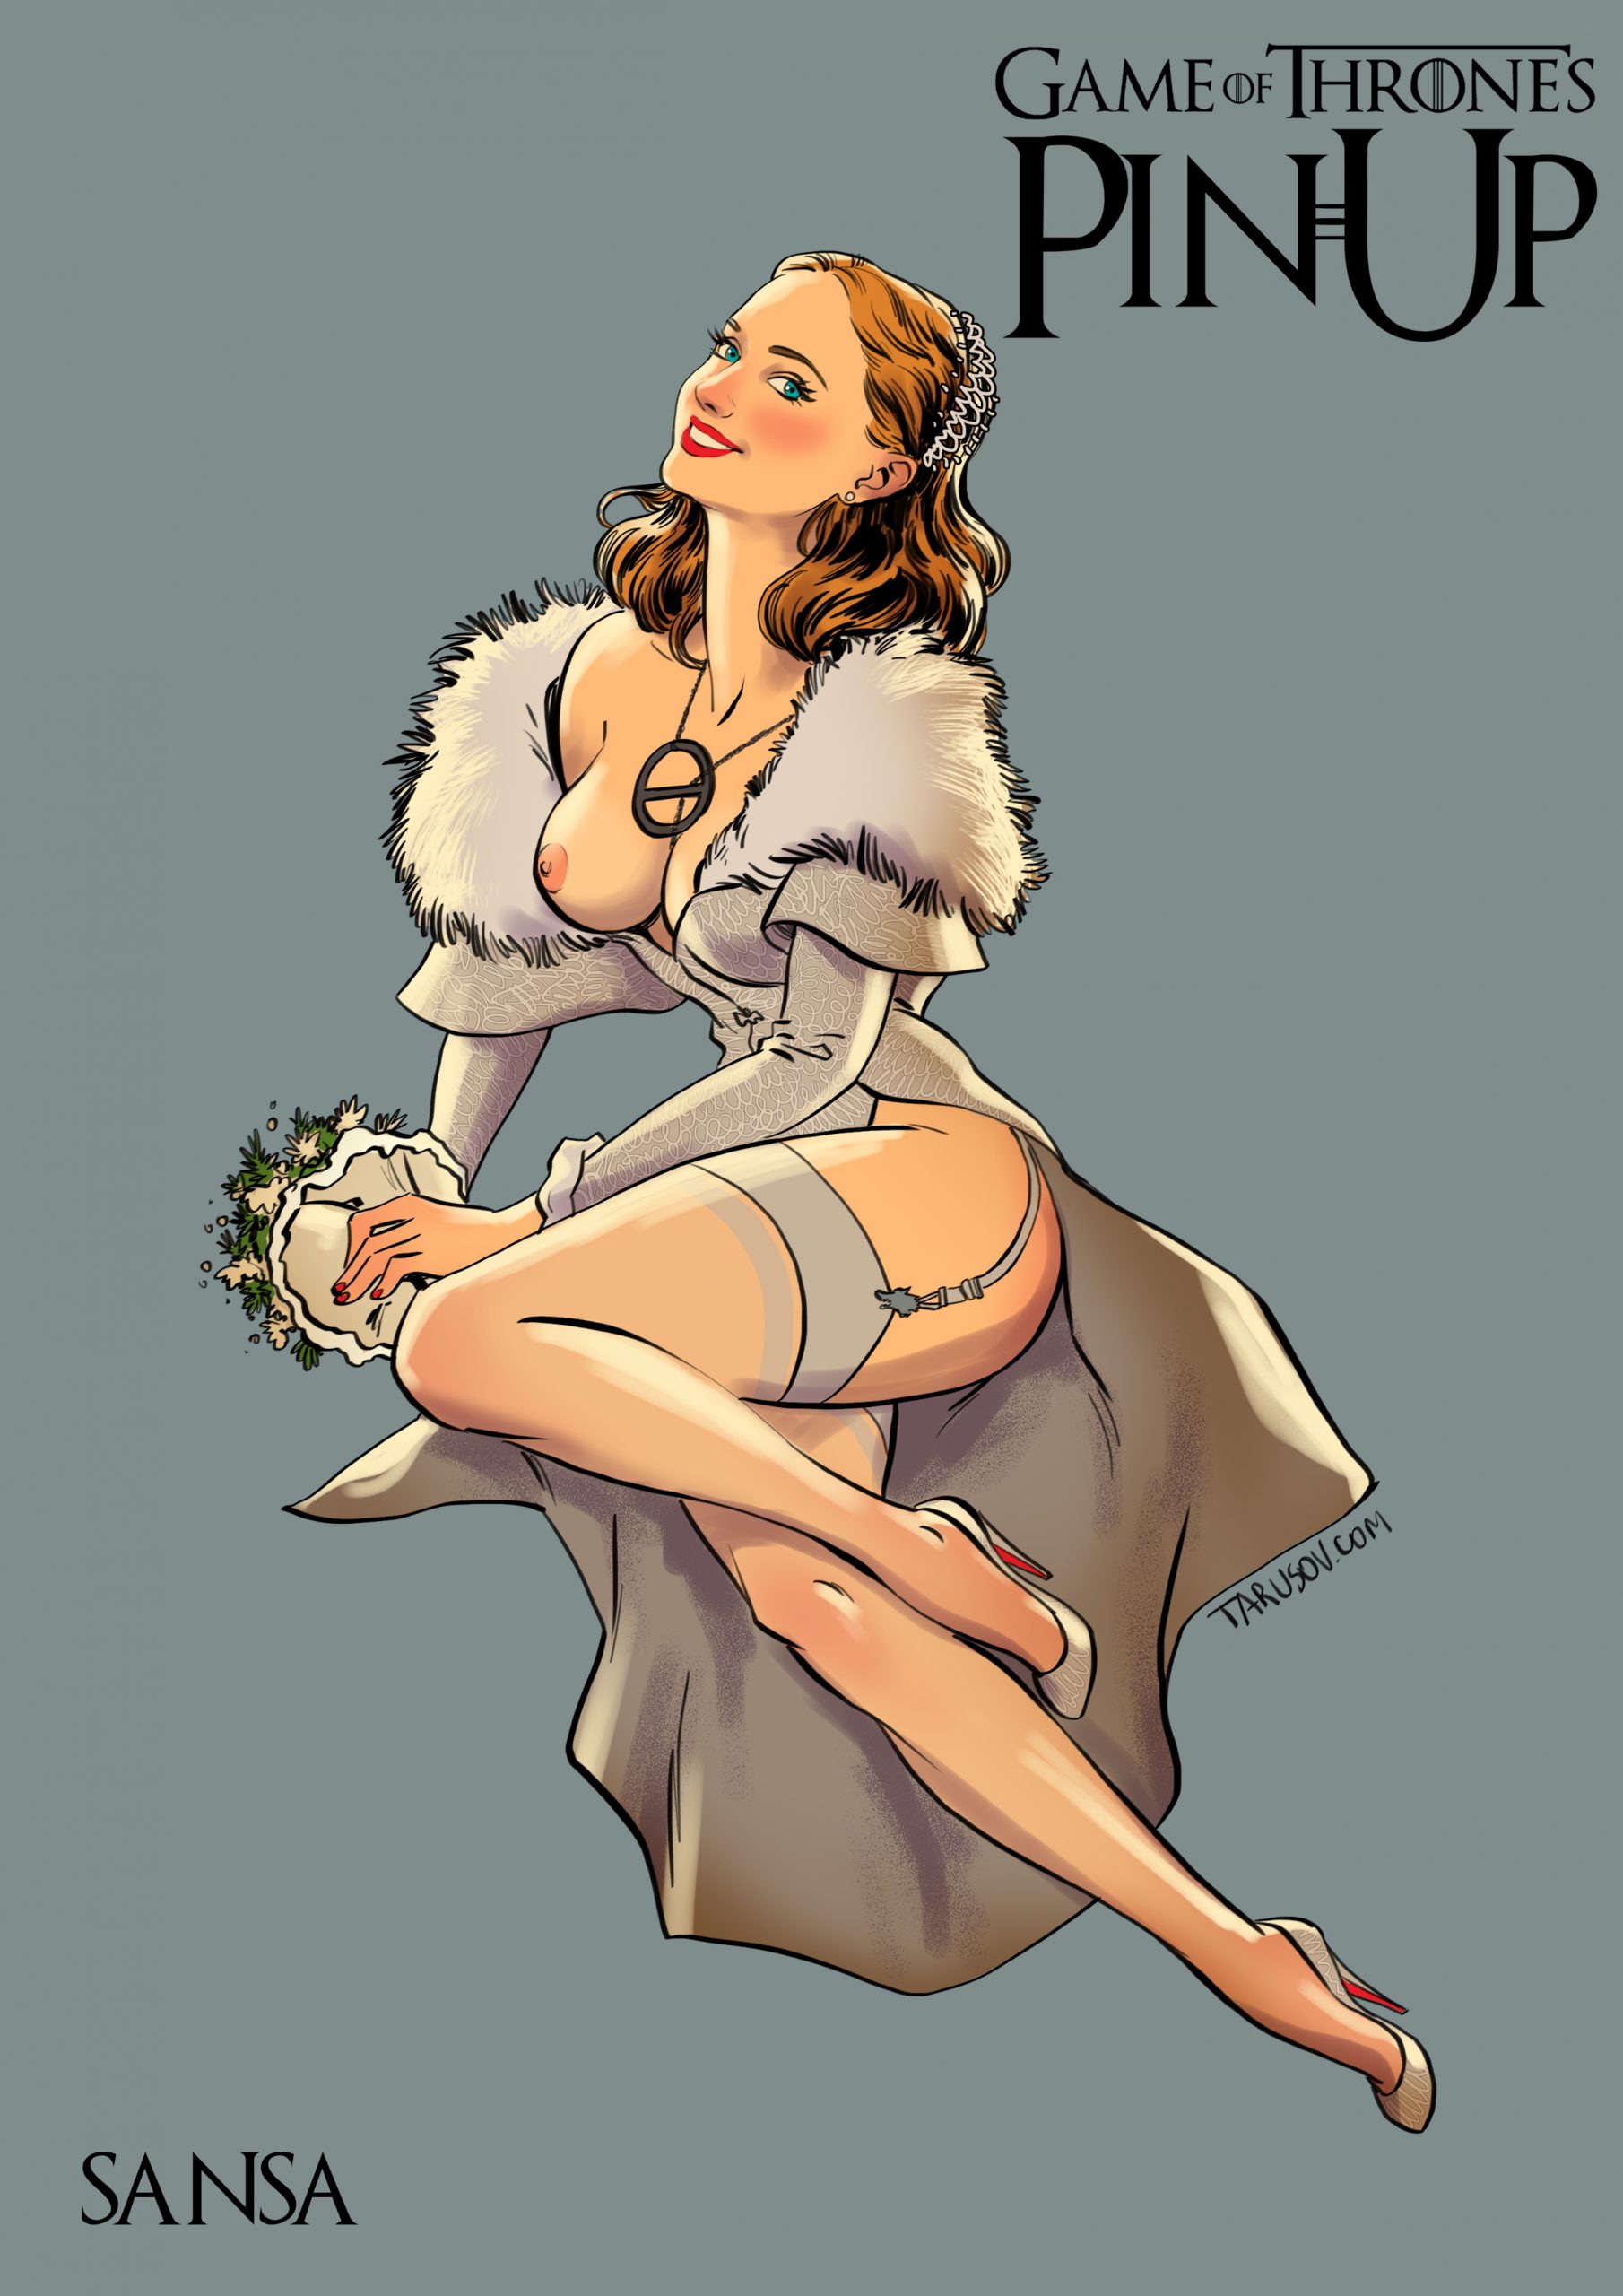 Cartoon Sex Game Of Thrones - Game of Thrones, pinup